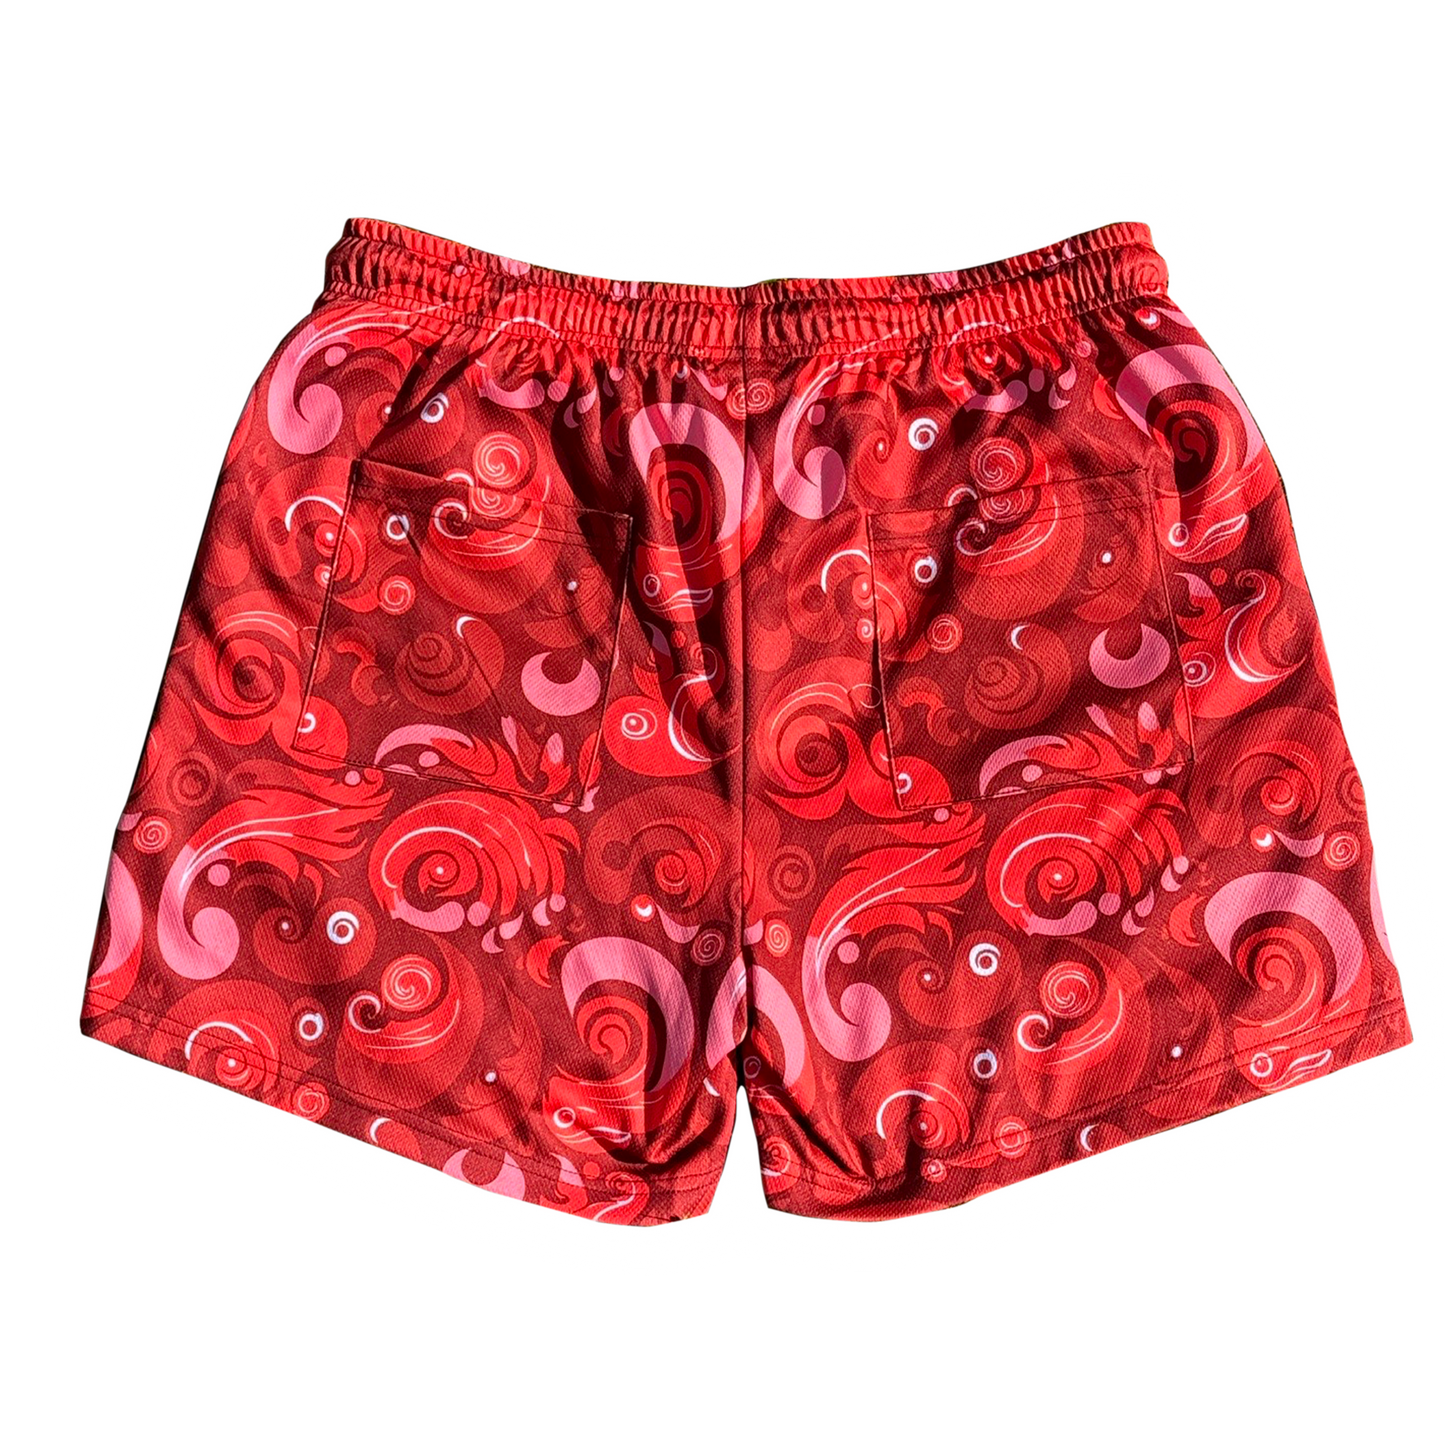 Red "TROPIC" Shorts